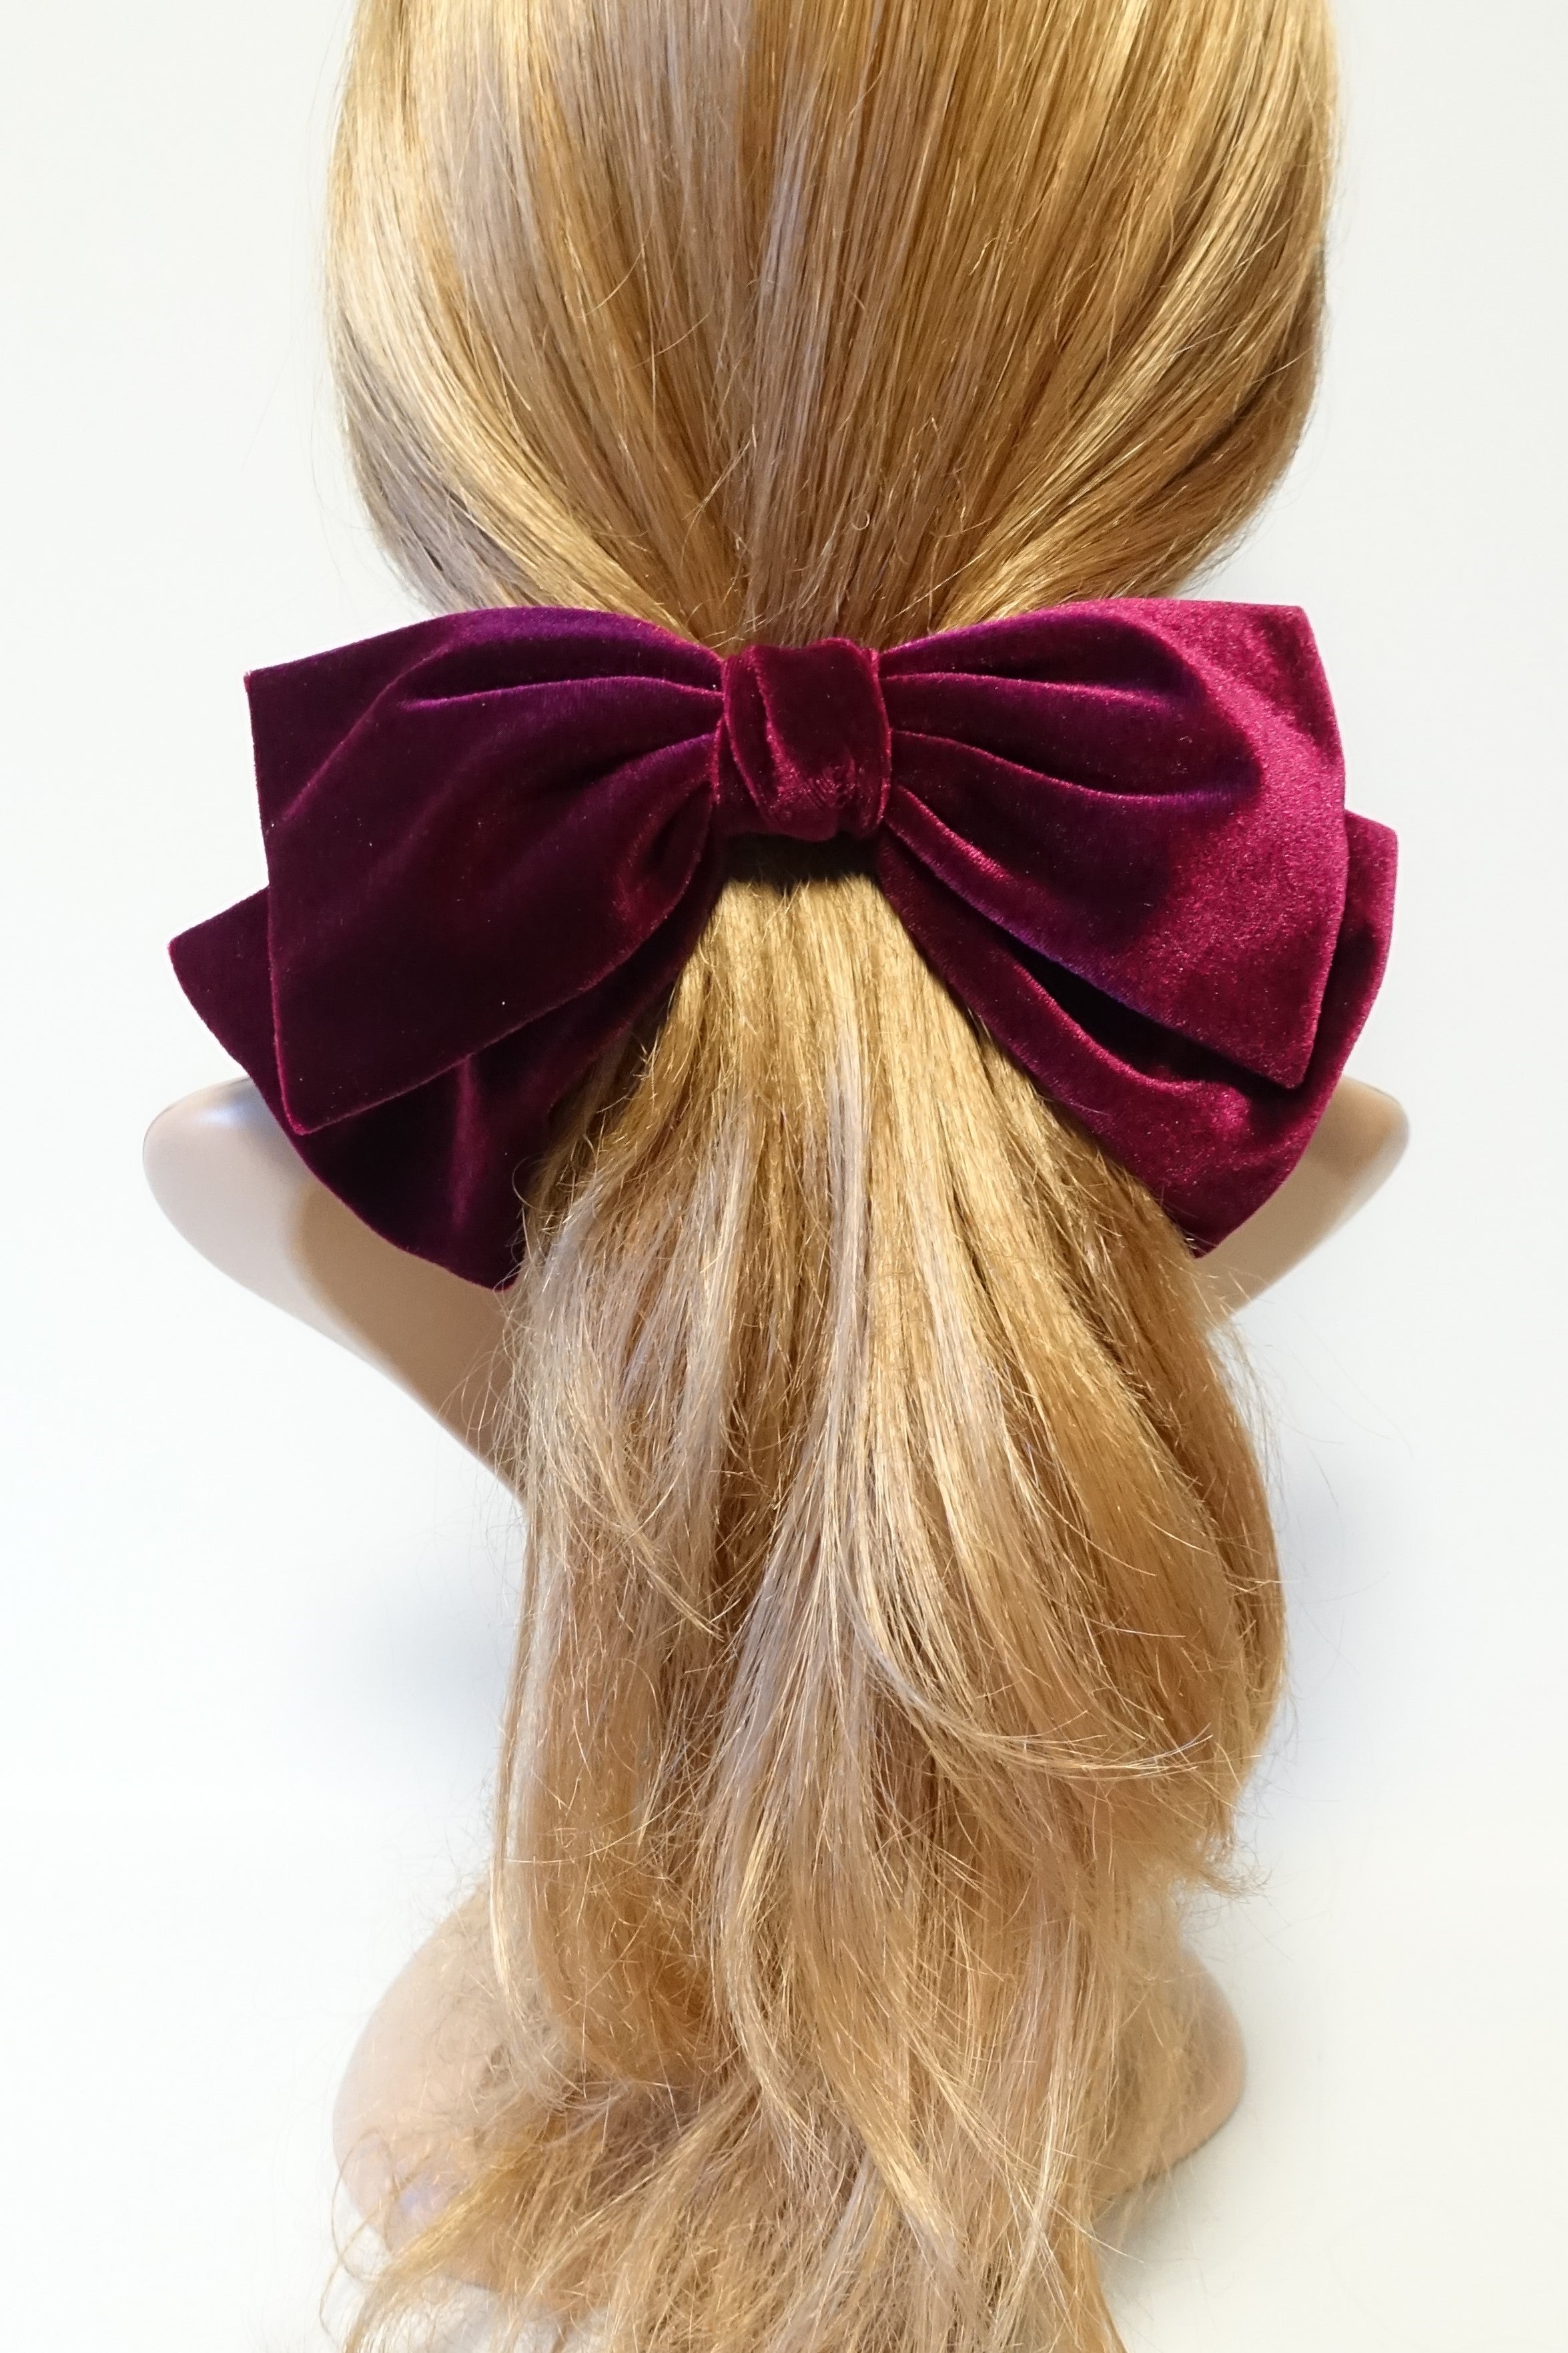 Hair Bow Suggestions for Autumn